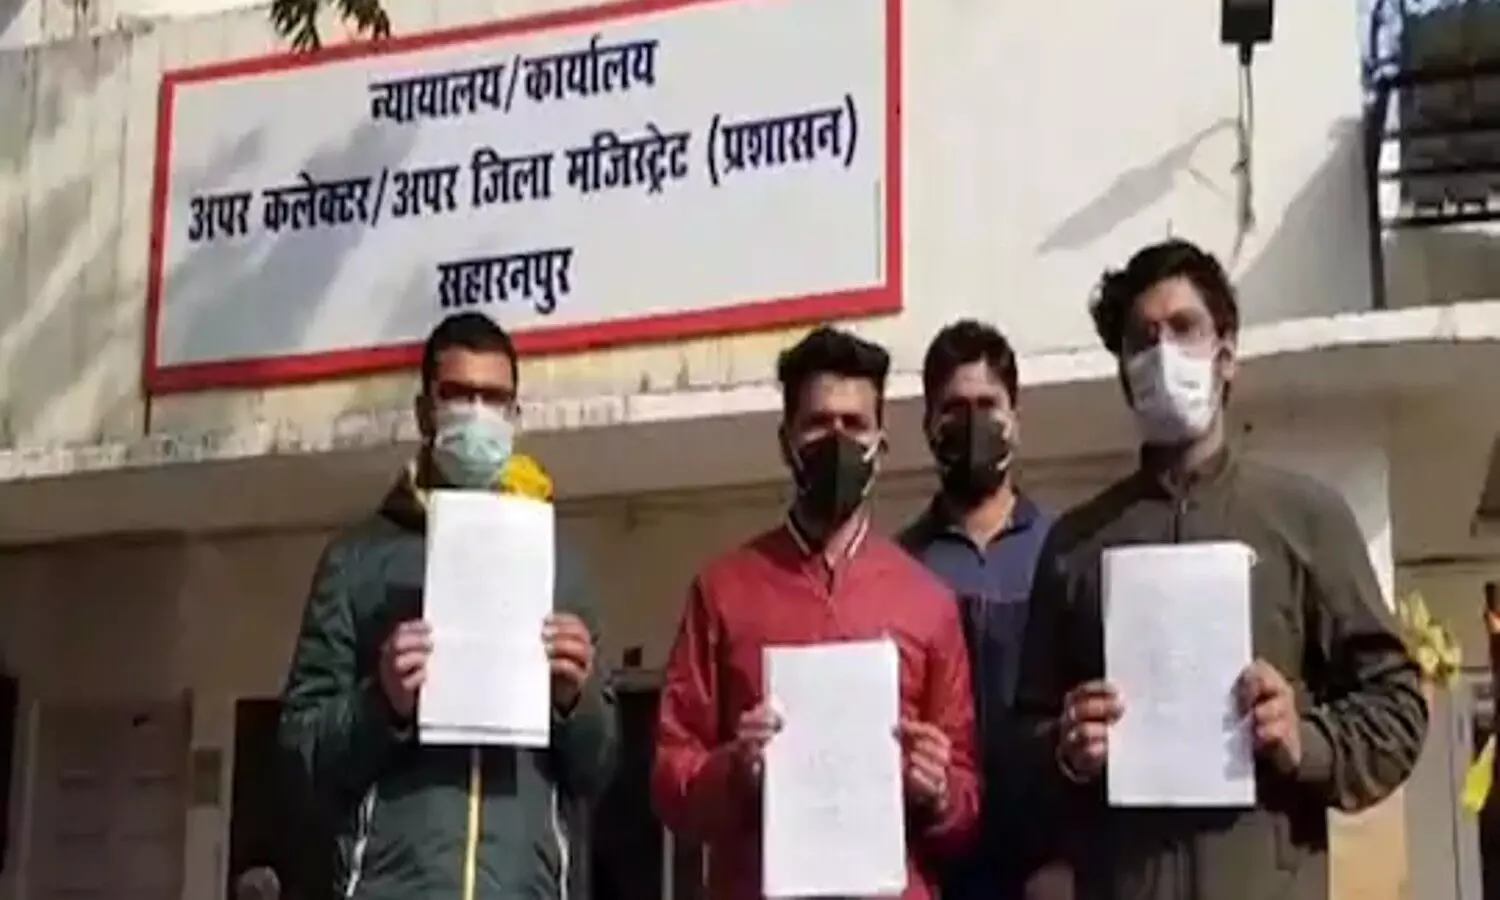 Medical college students demand